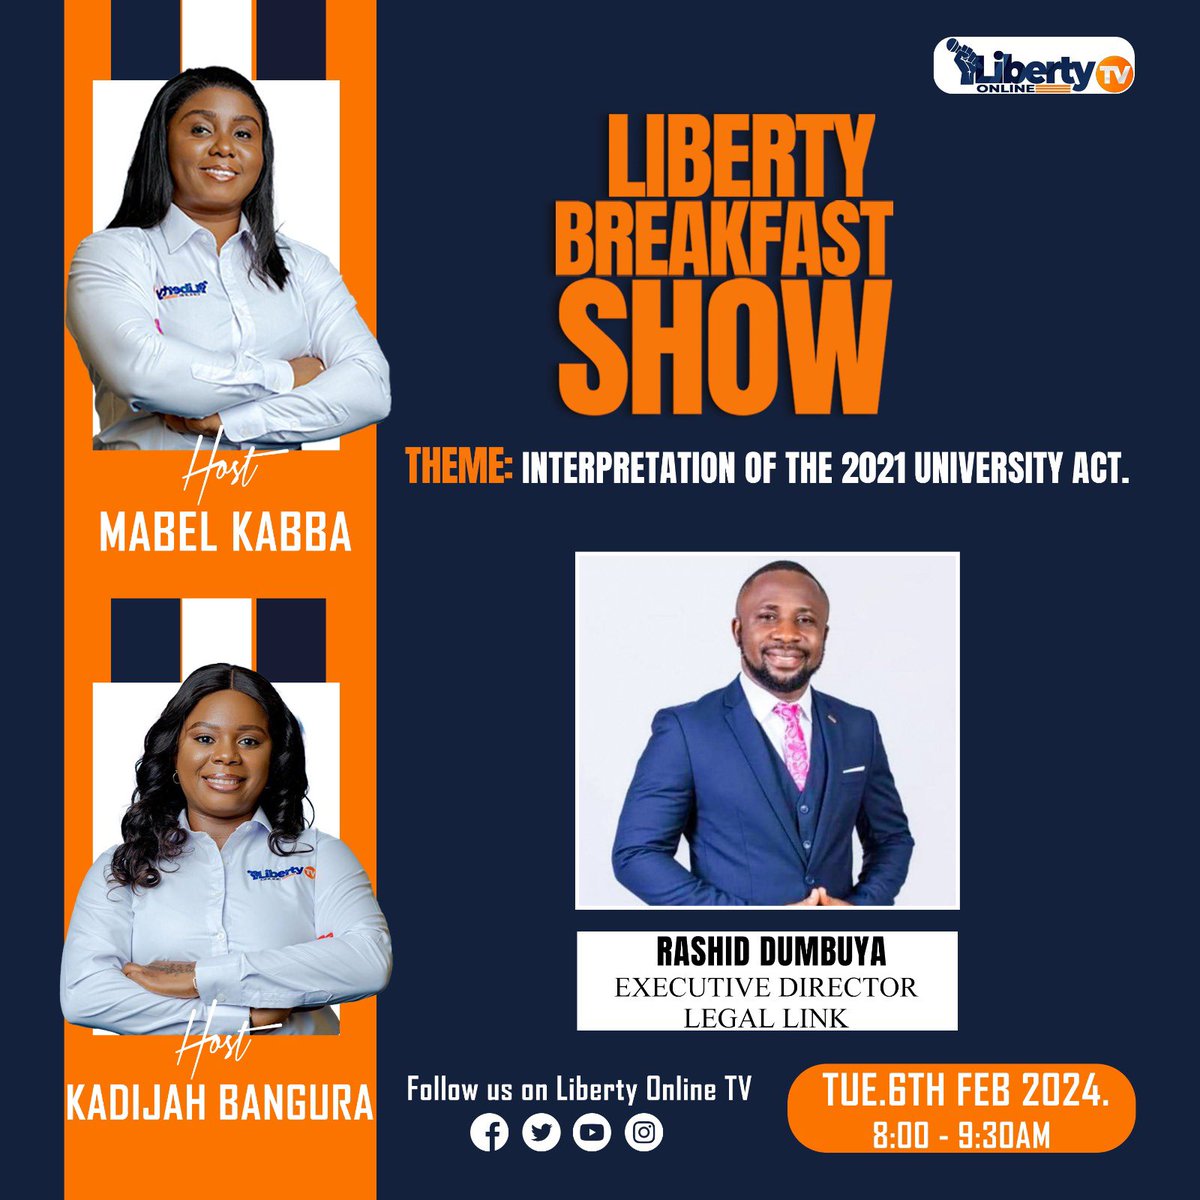 Amidst the ongoing dispute between the Ministry of Technical and Higher Education and the USL Administration, we'll have Rashid Dumbuya Esq., Executive Director for Legal Links, on tomorrow's Liberty Breakfast Show to offer an in-depth interpretation of the 2021 University Act.